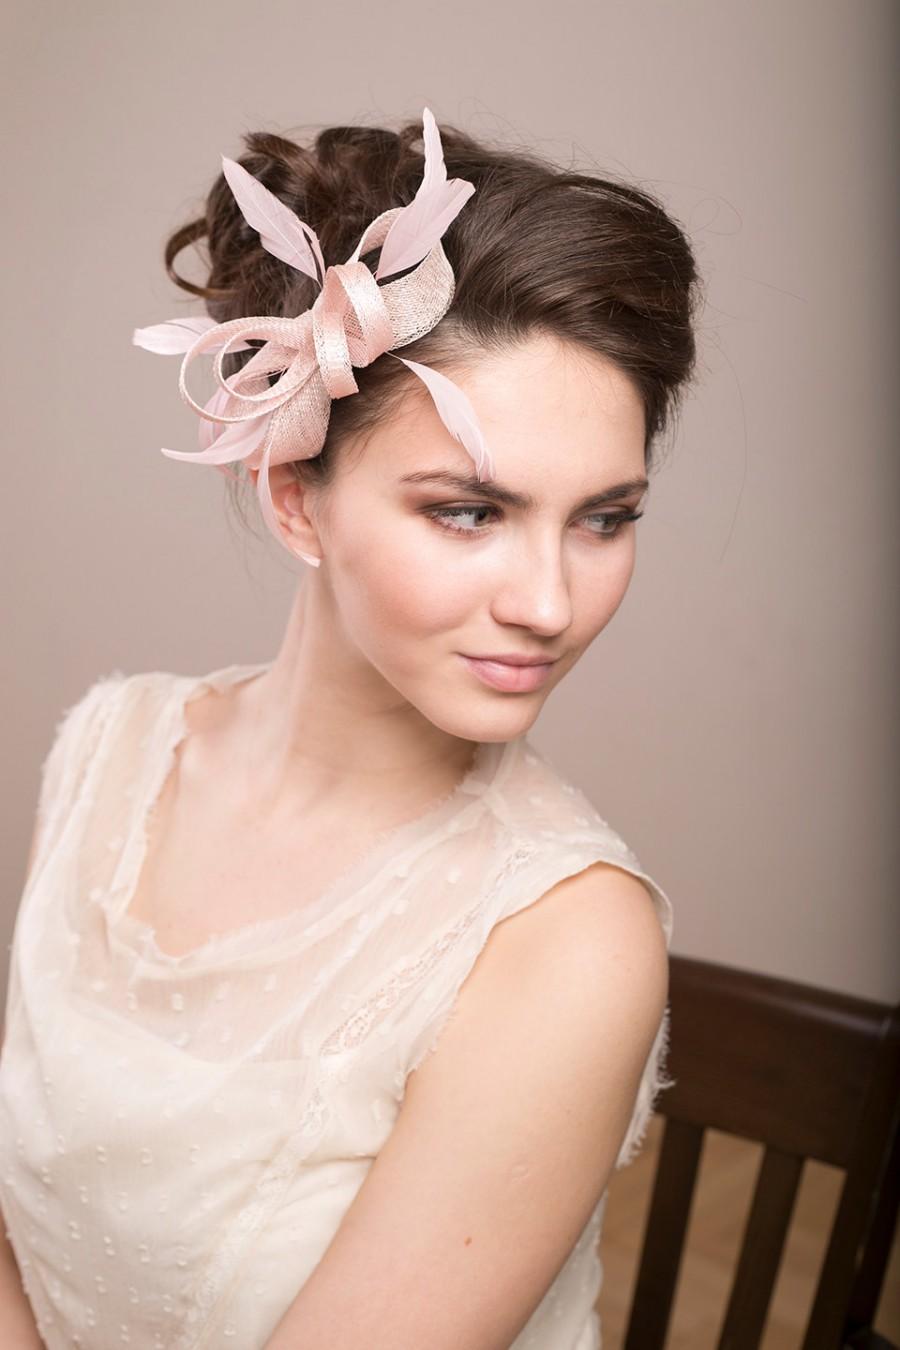 Wedding - Millinery headpiece with feathers, wedding millinery fascinator